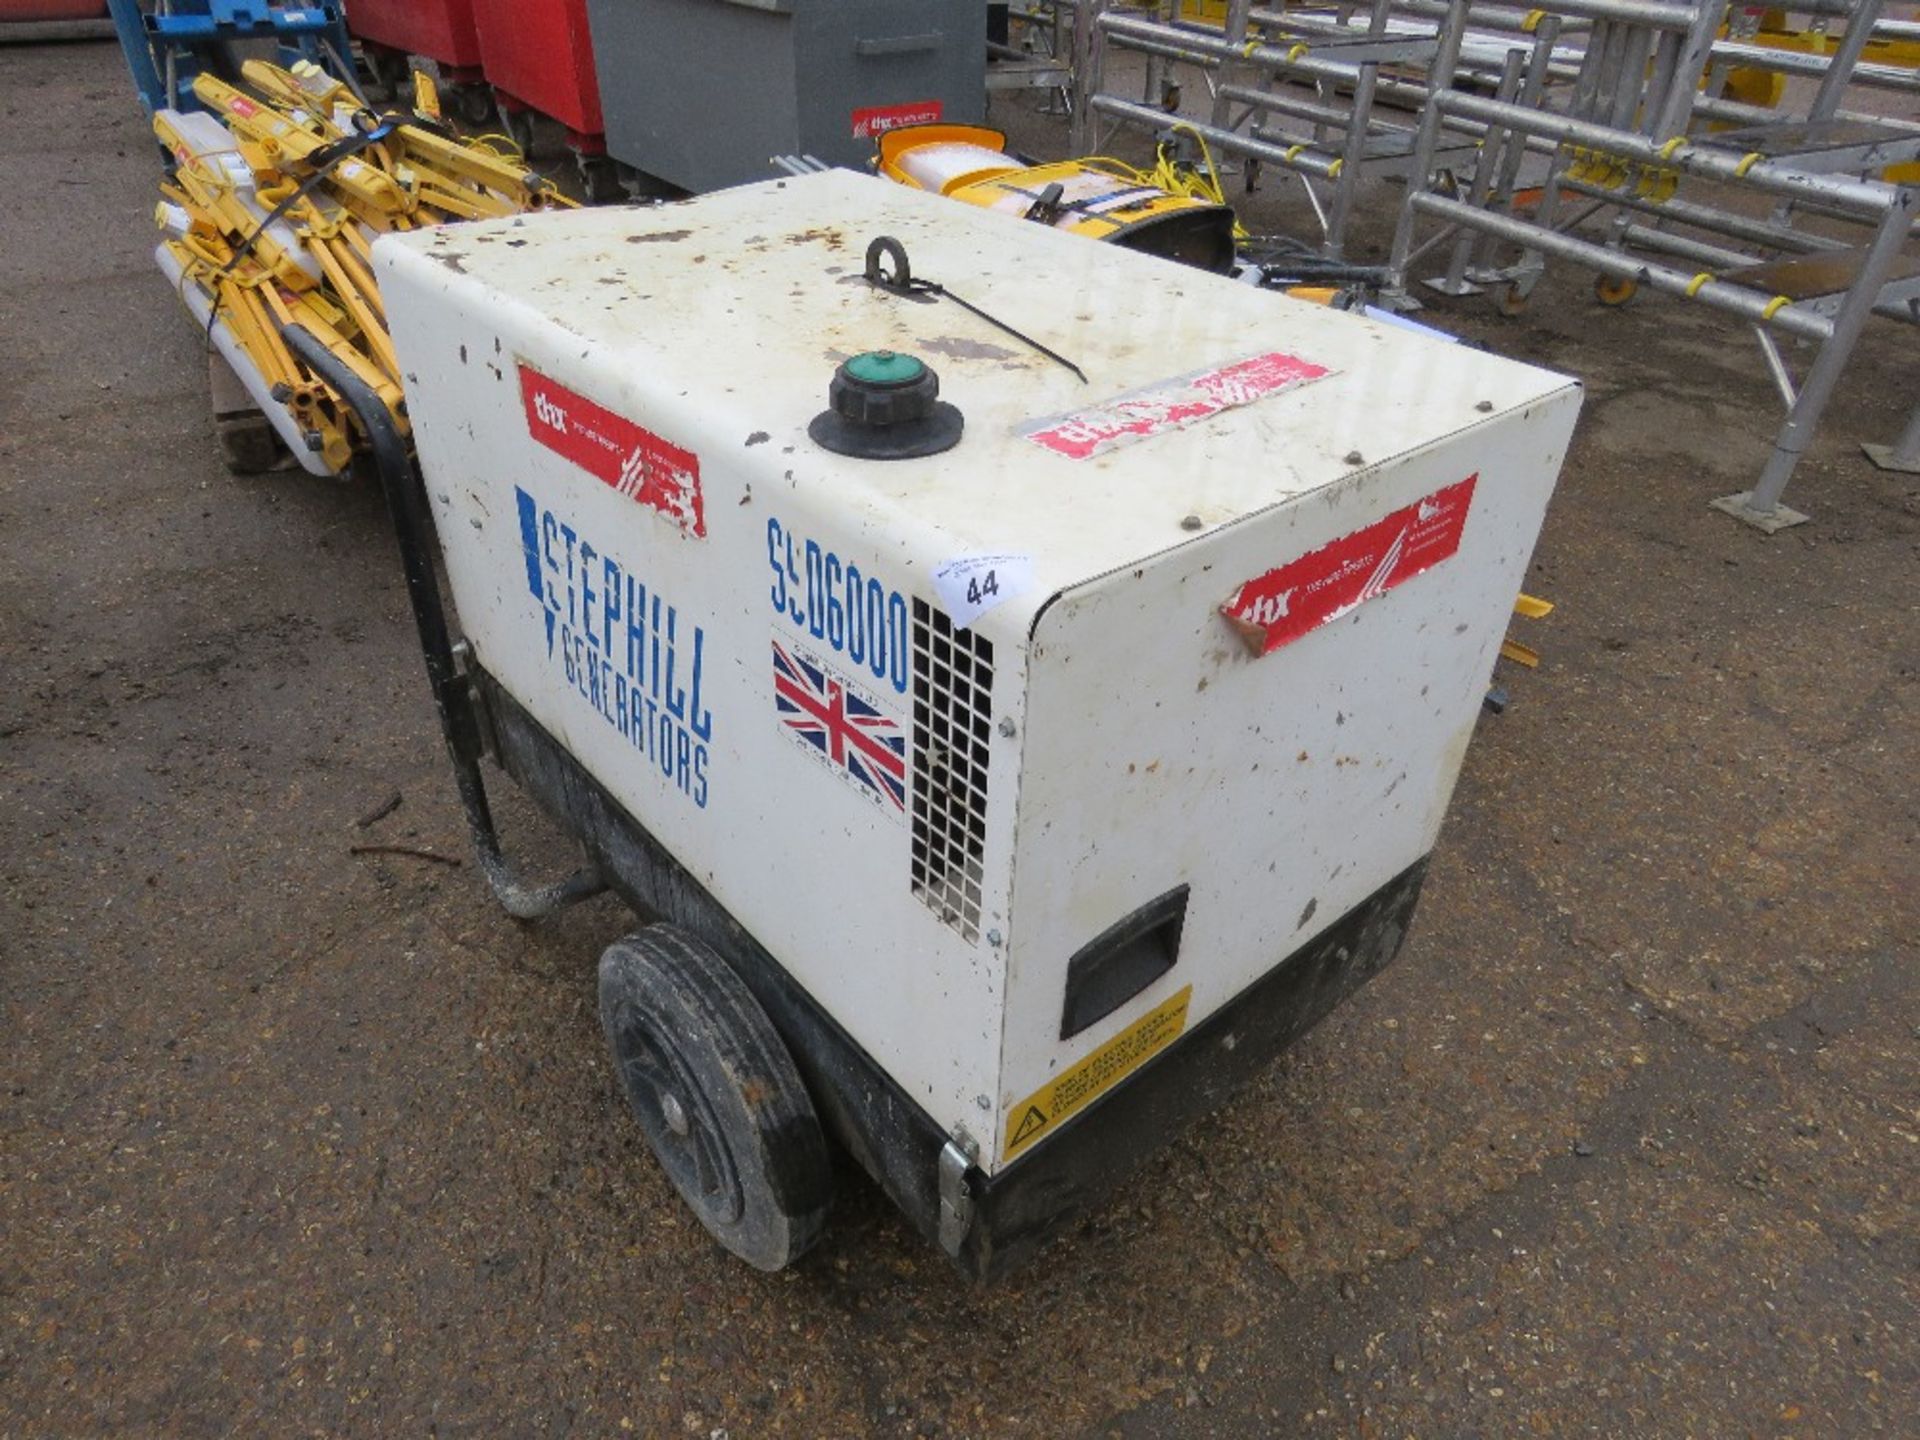 STEPHILL 6KVA BARROW DIESEL GENERATOR. WHEN TESTED WAS SEEN TO RUN, OUTPUT UNTESTED. THX9750 - Image 3 of 8